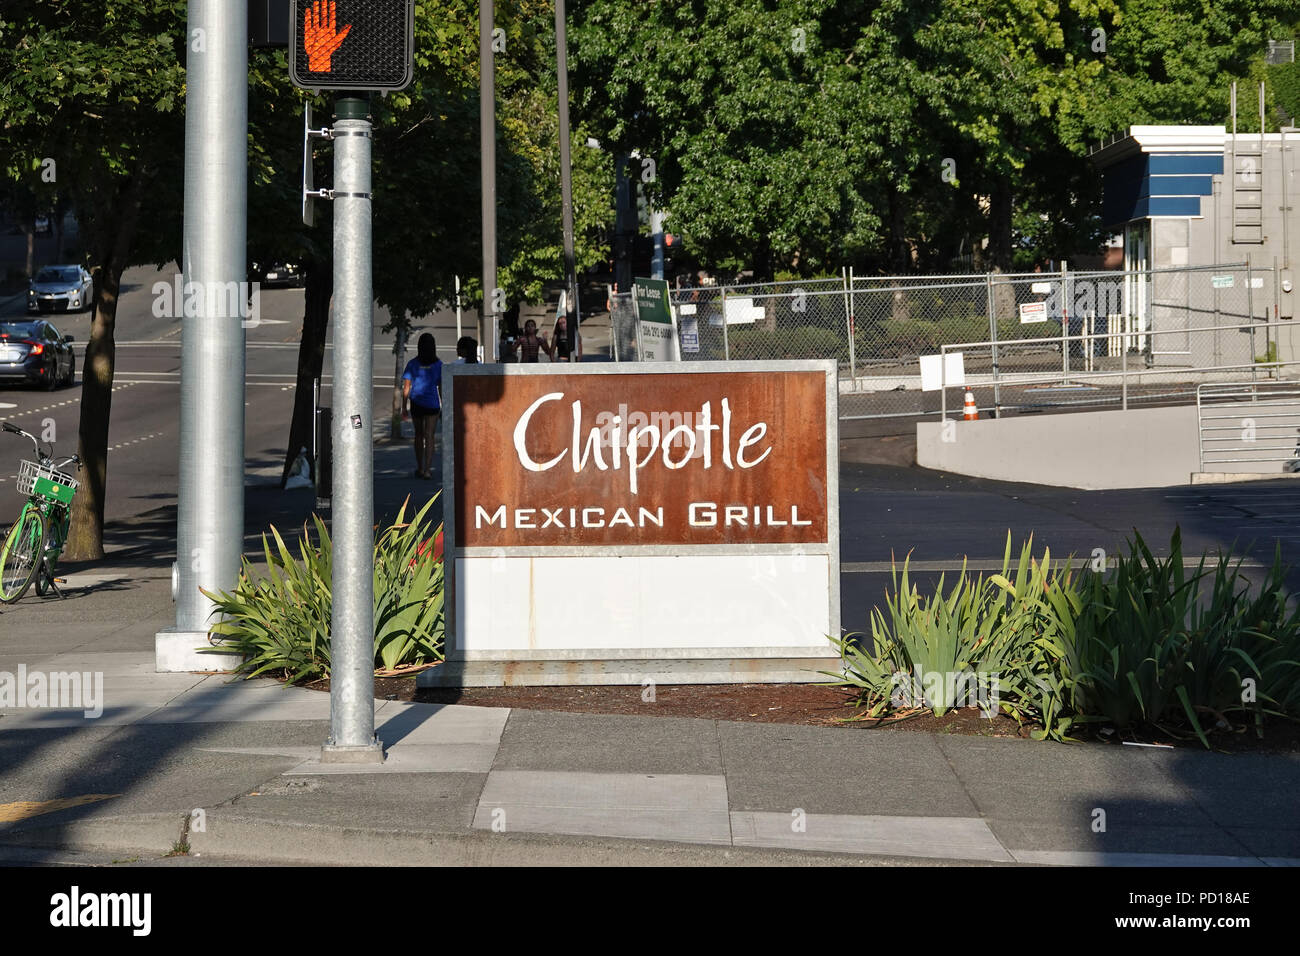 Chipotle Mexican Grill sign Stock Photo